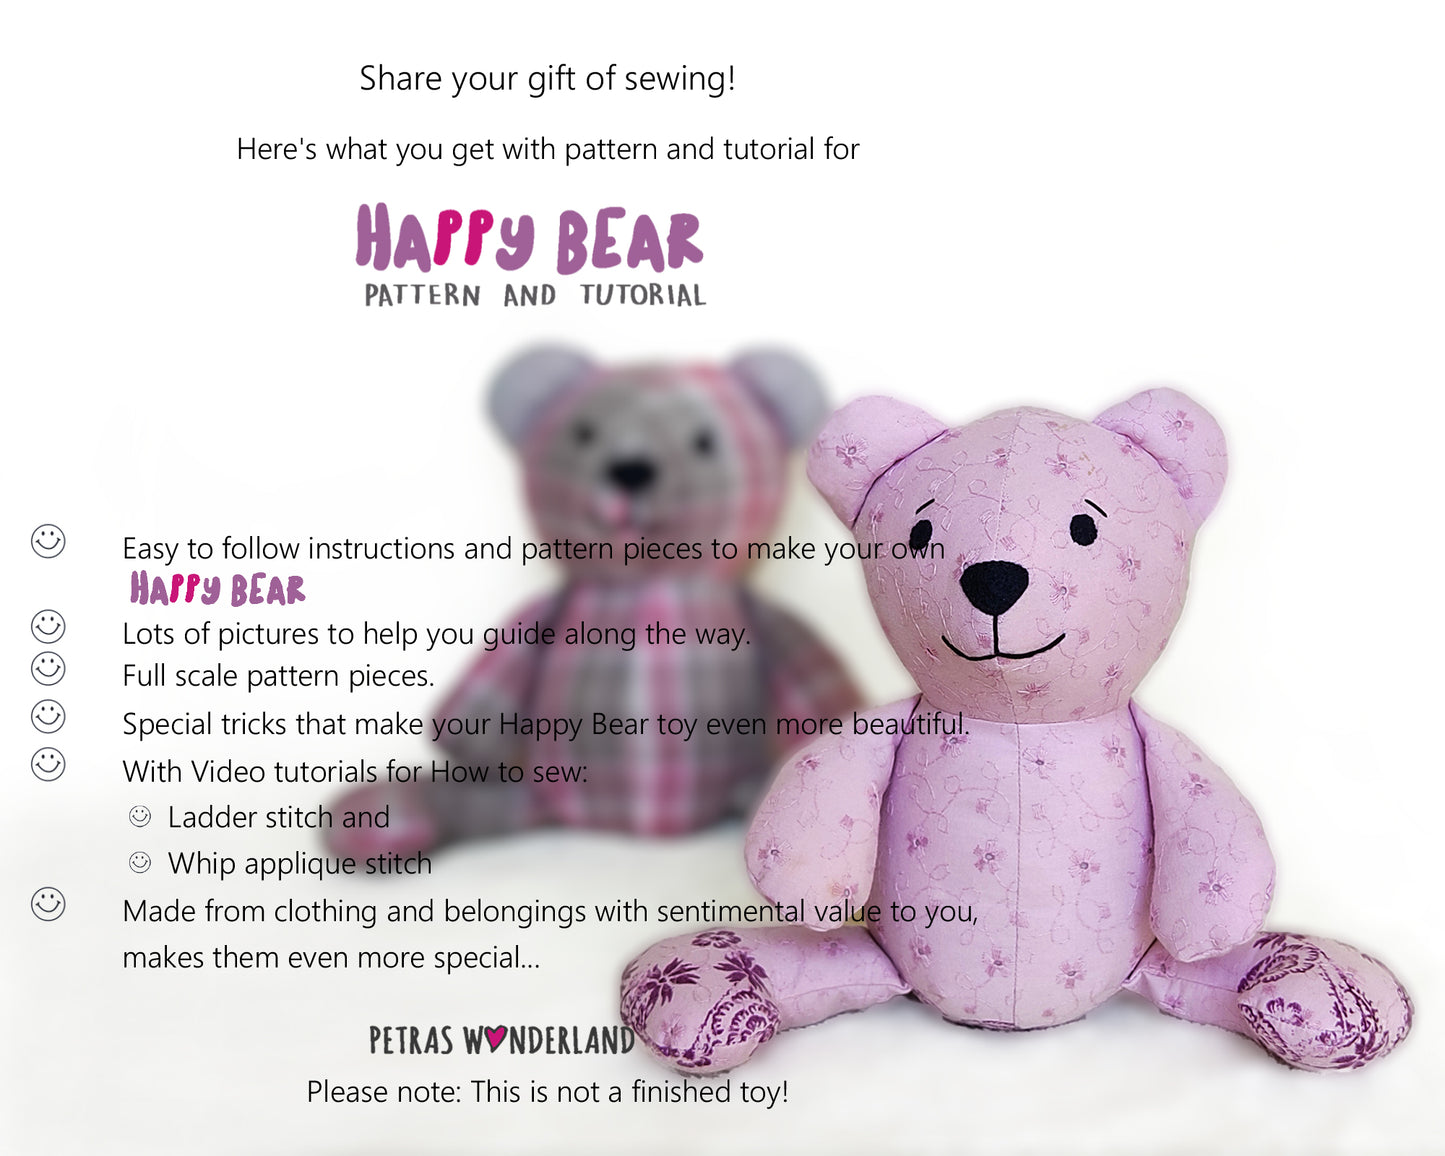 Happy Bear - PDF sewing pattern and tutorial 08